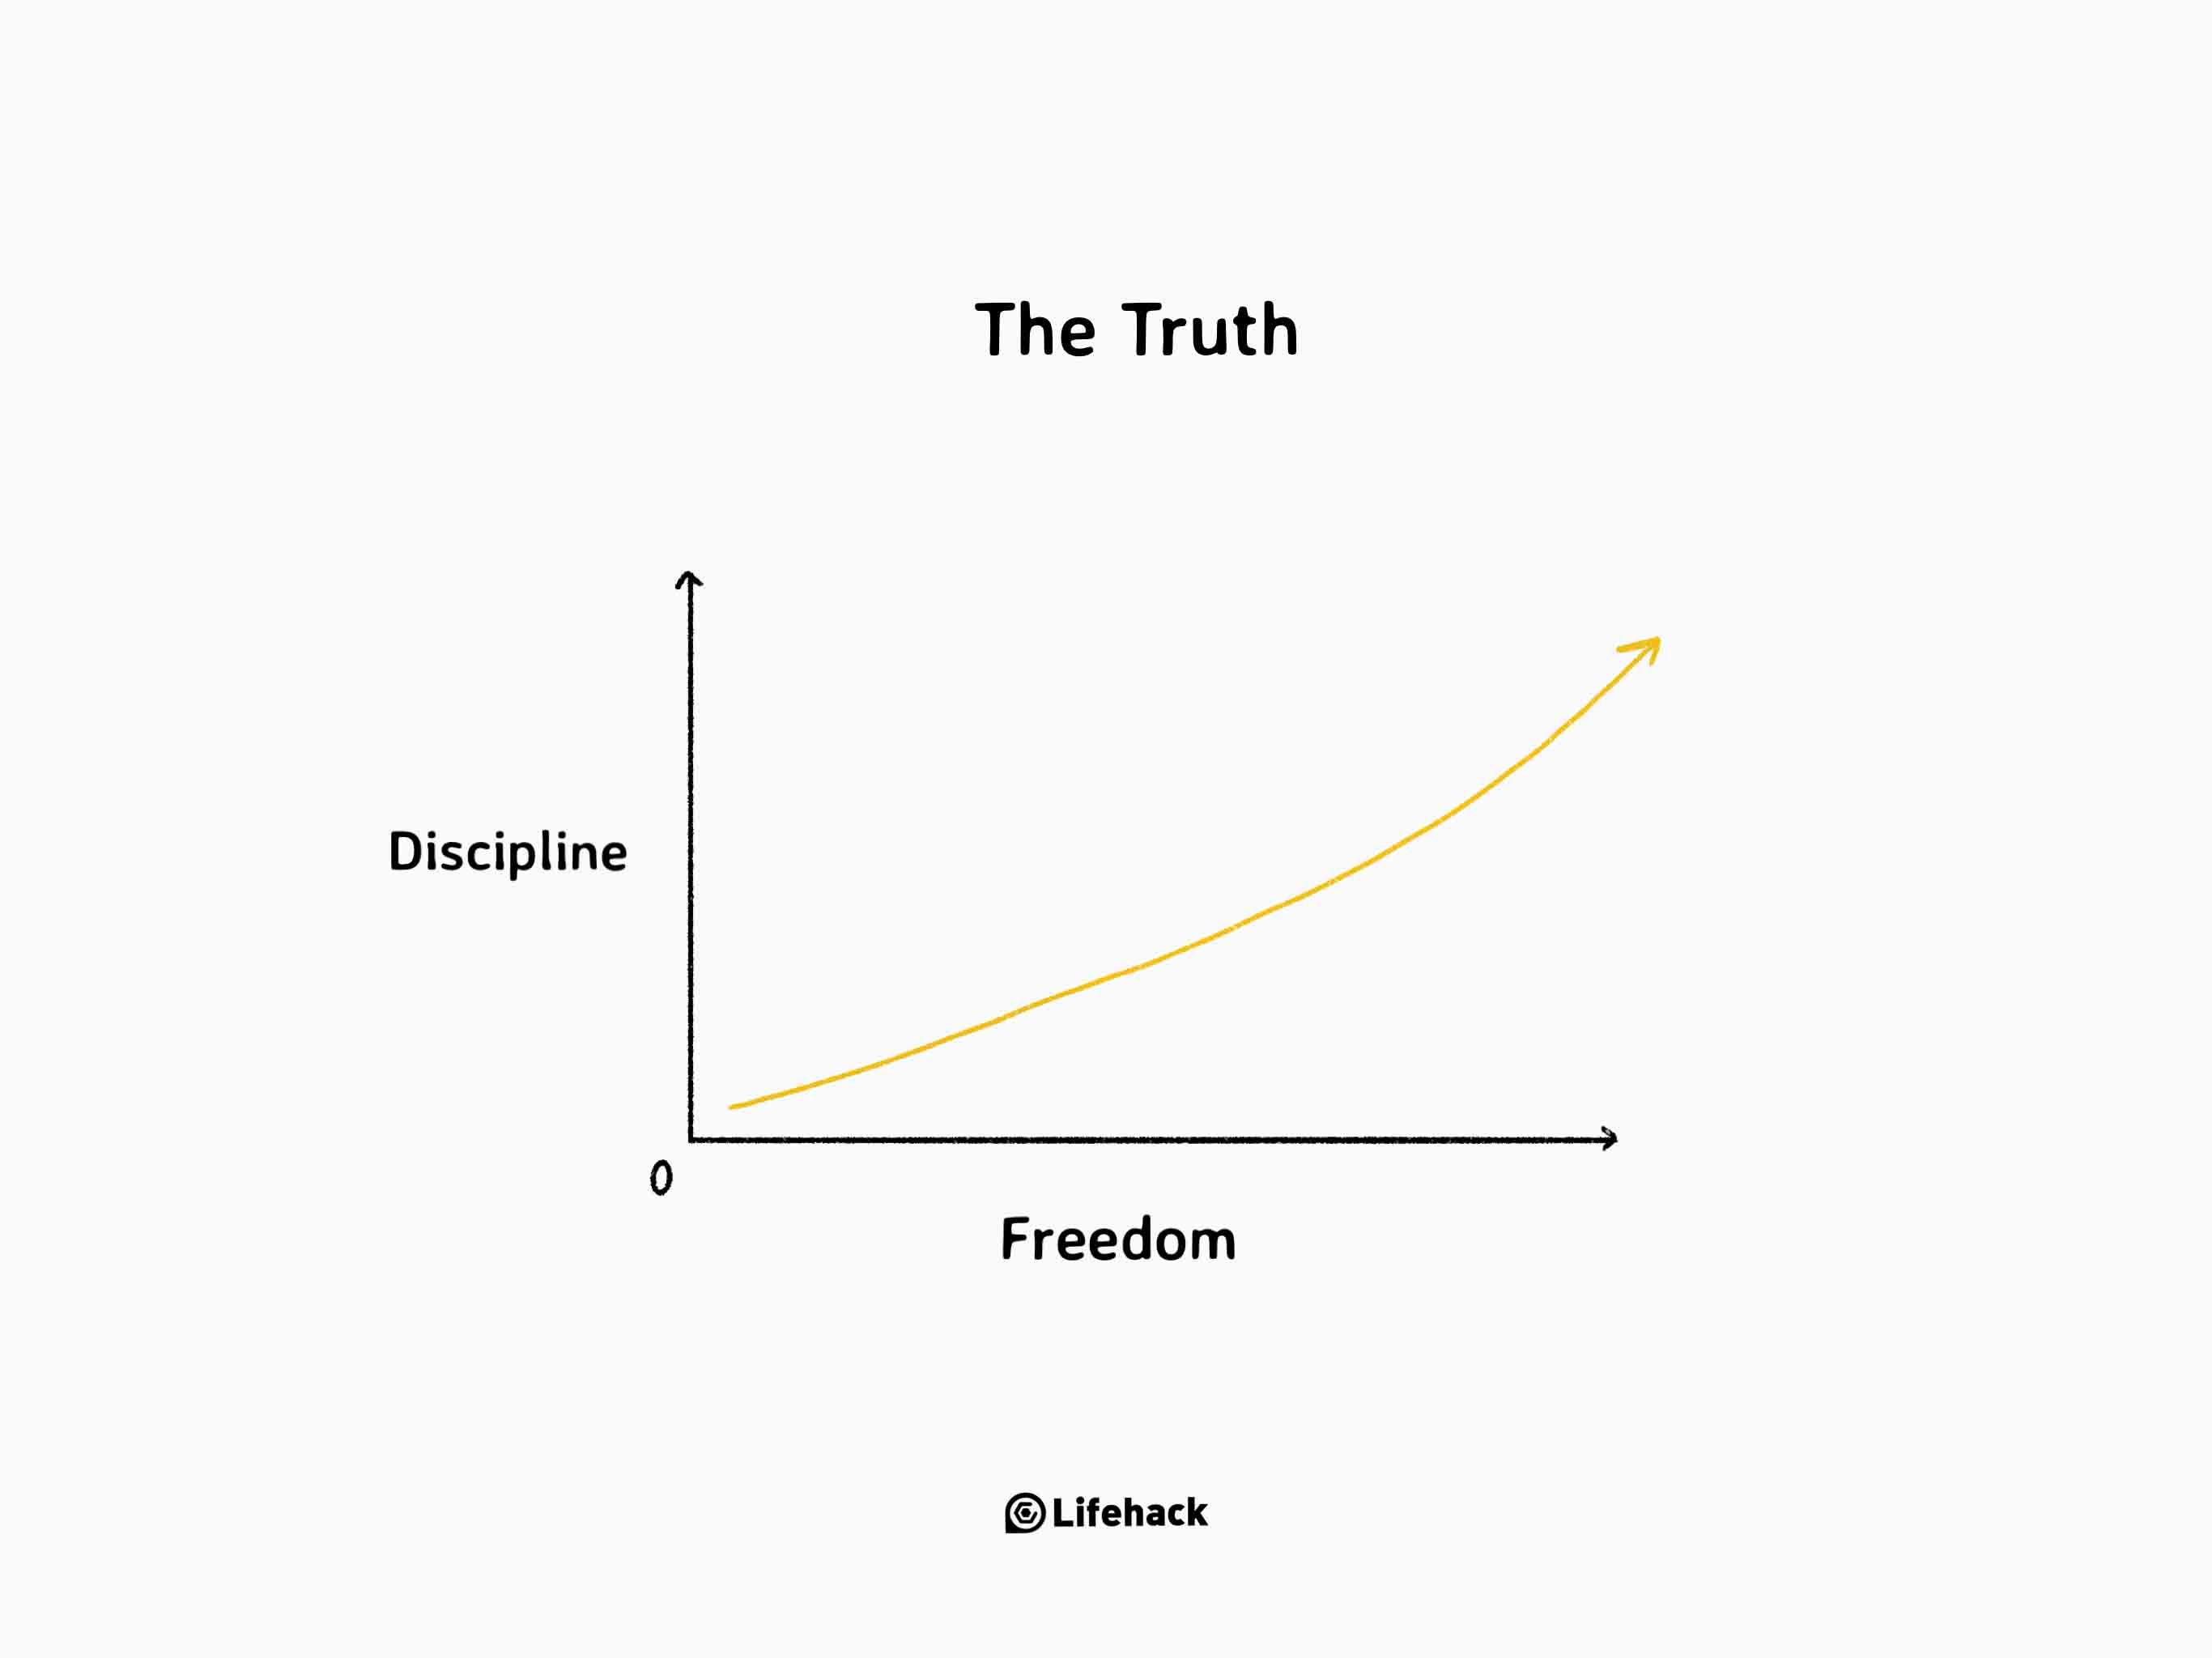 Does Less Discipline Equal More Freedom?